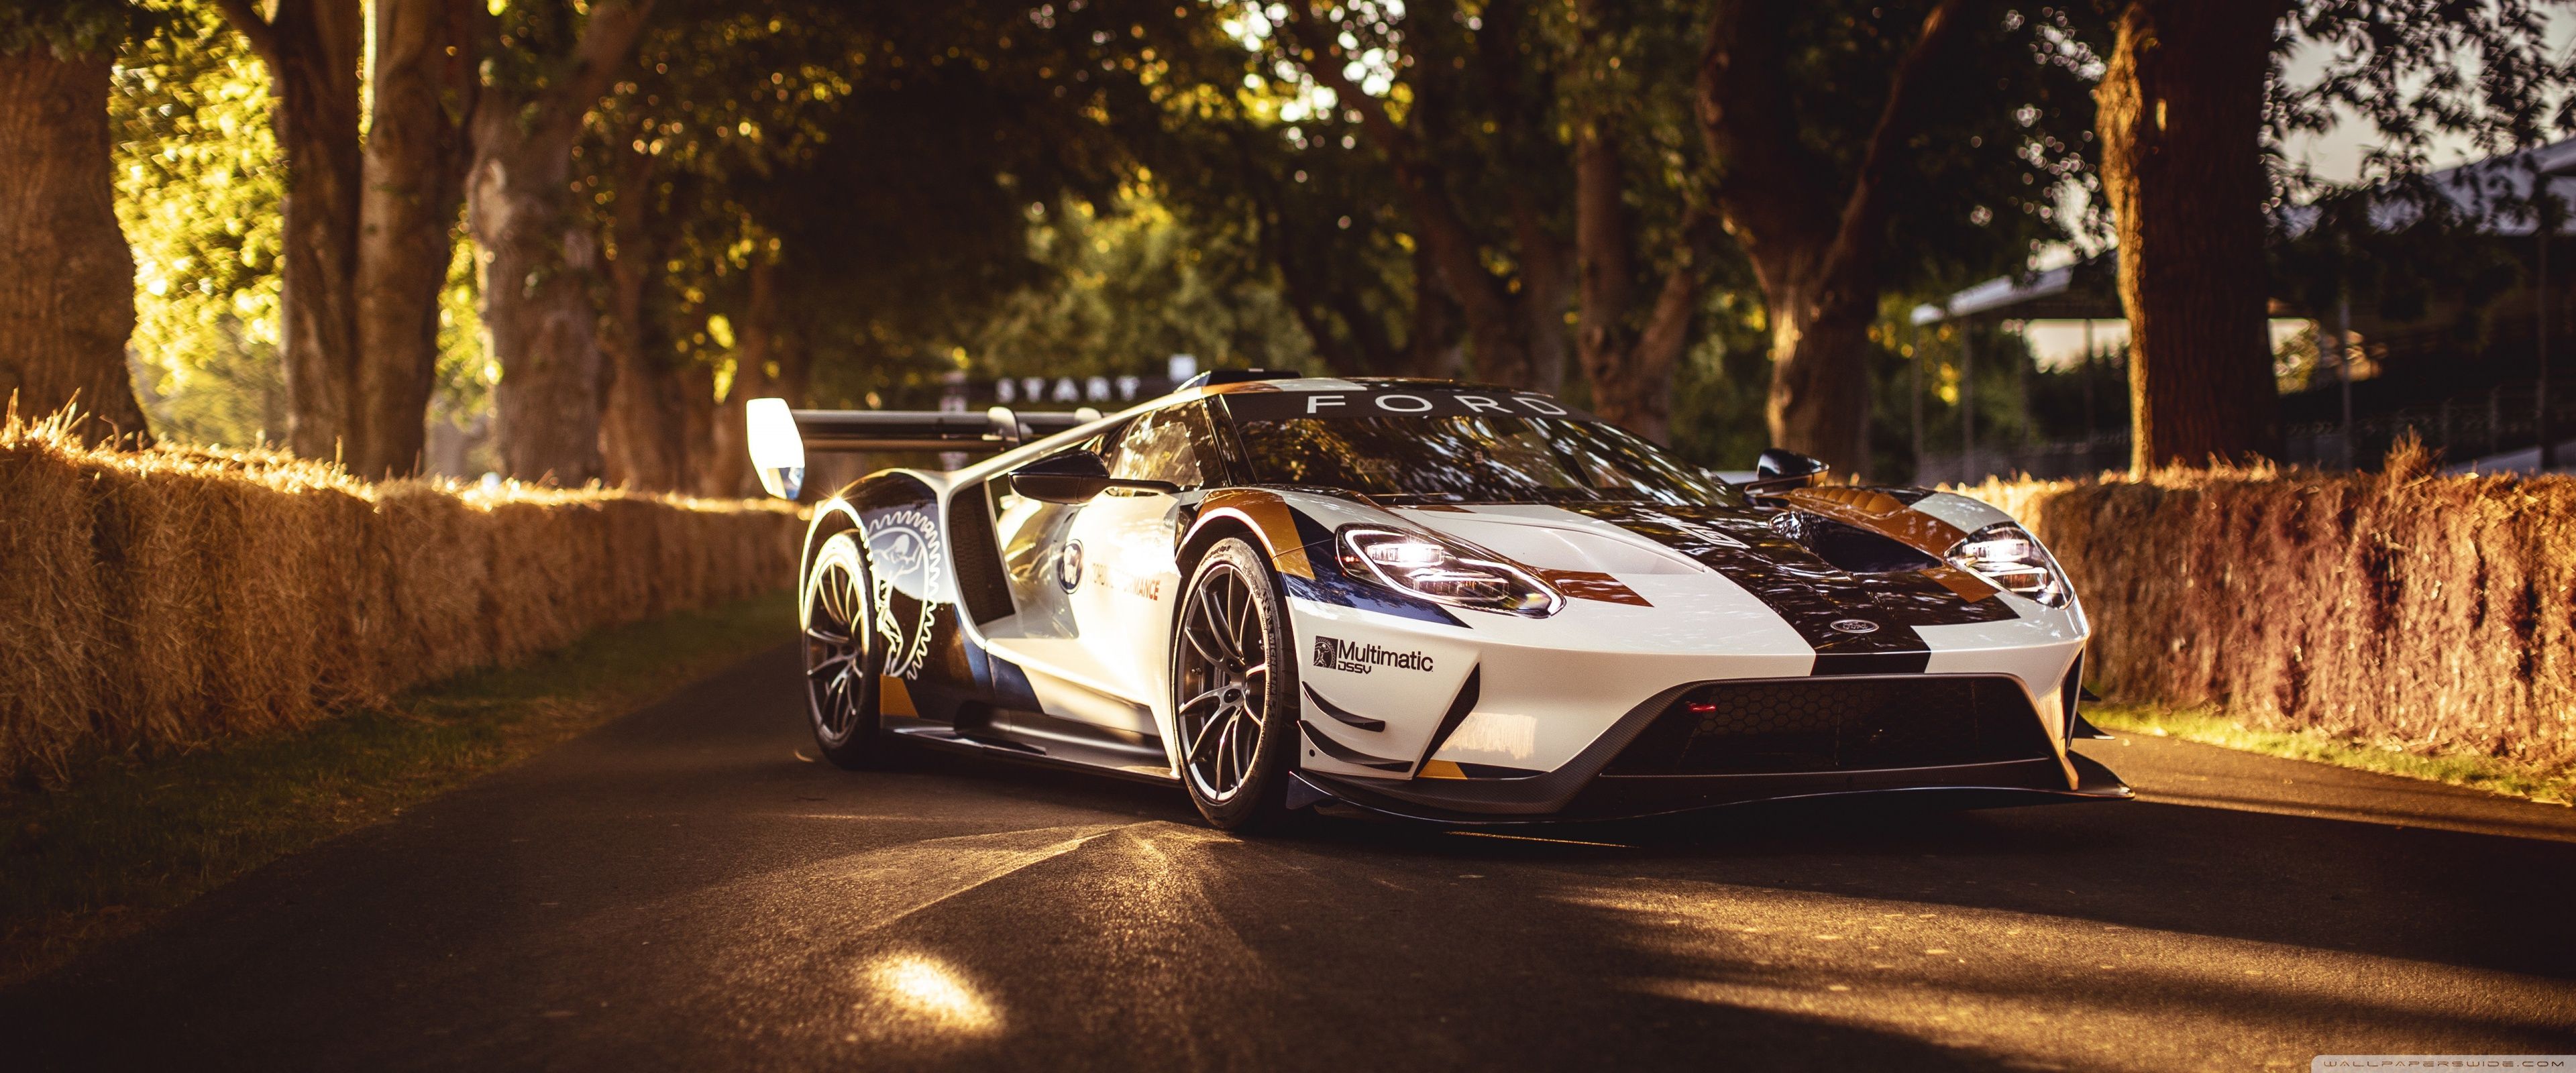 Ford GT mk II, for dual Monitor [3840x 1600]